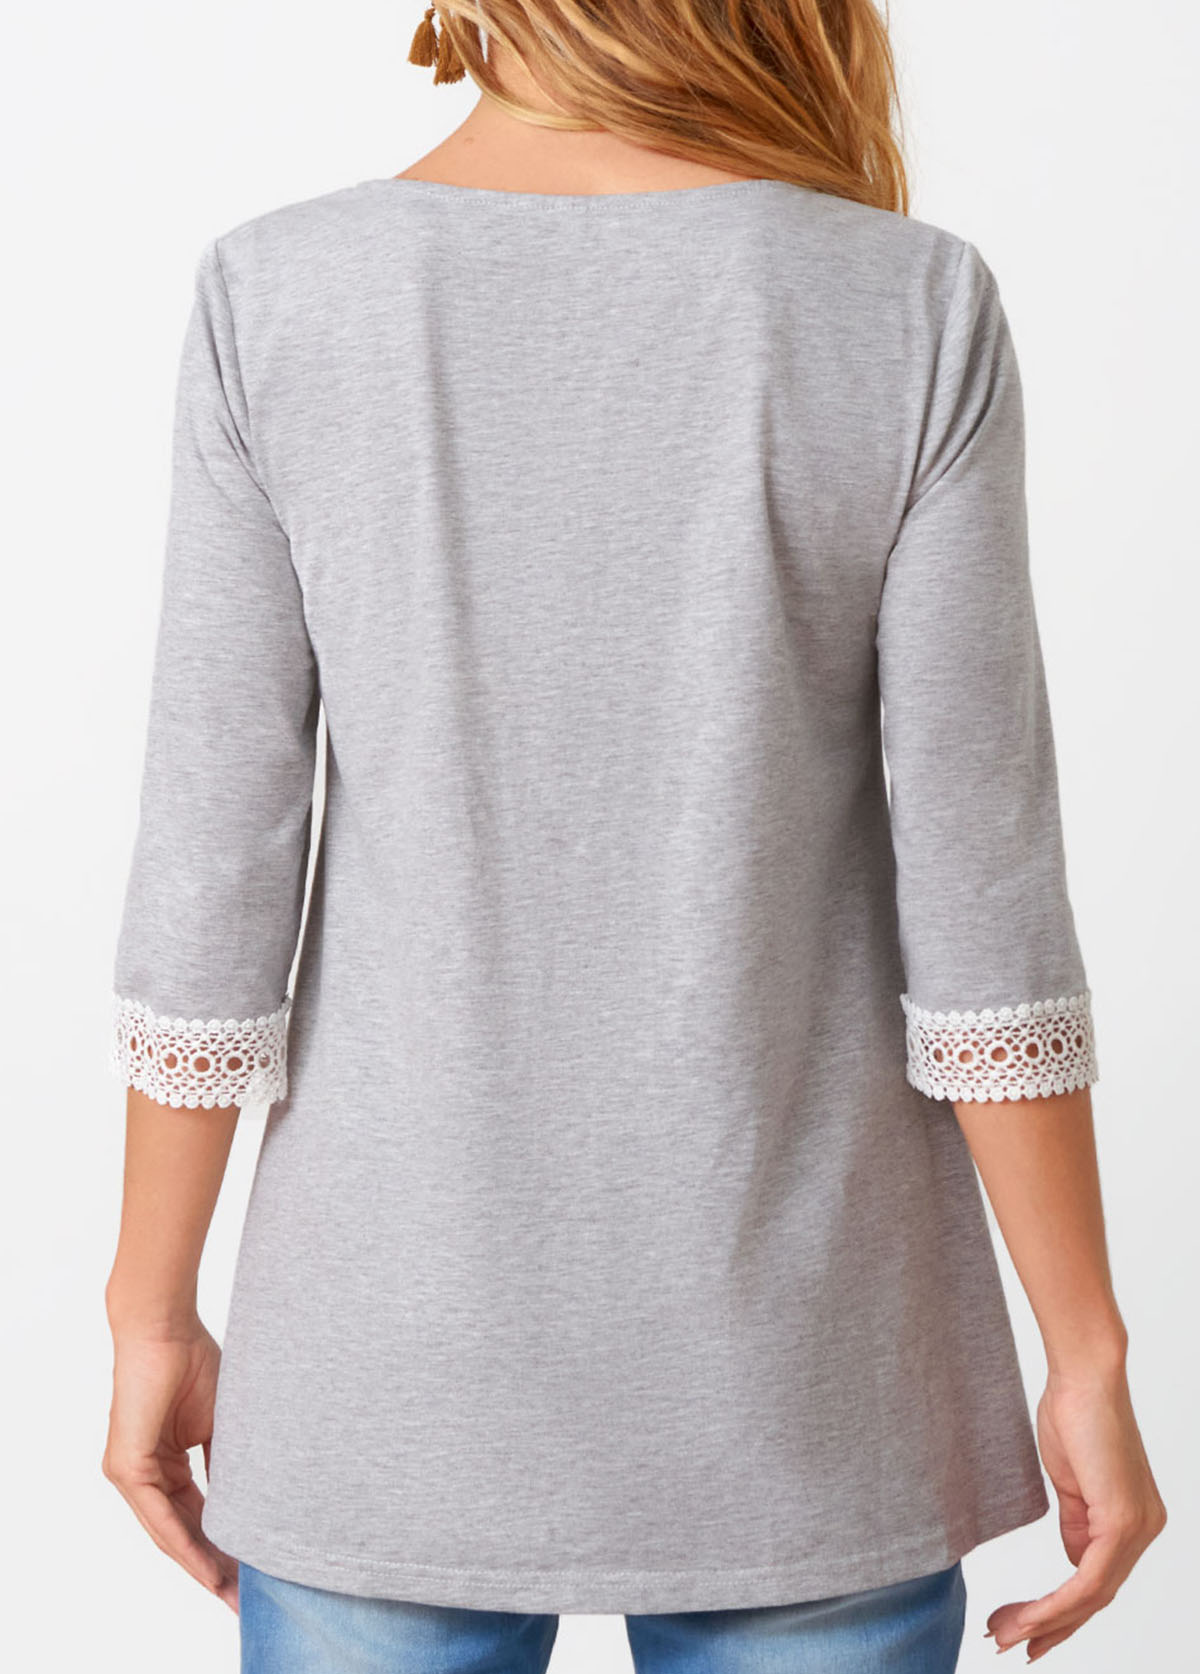 Three Quarters Sleeve Lace Patchwork Round Neck T Shirt